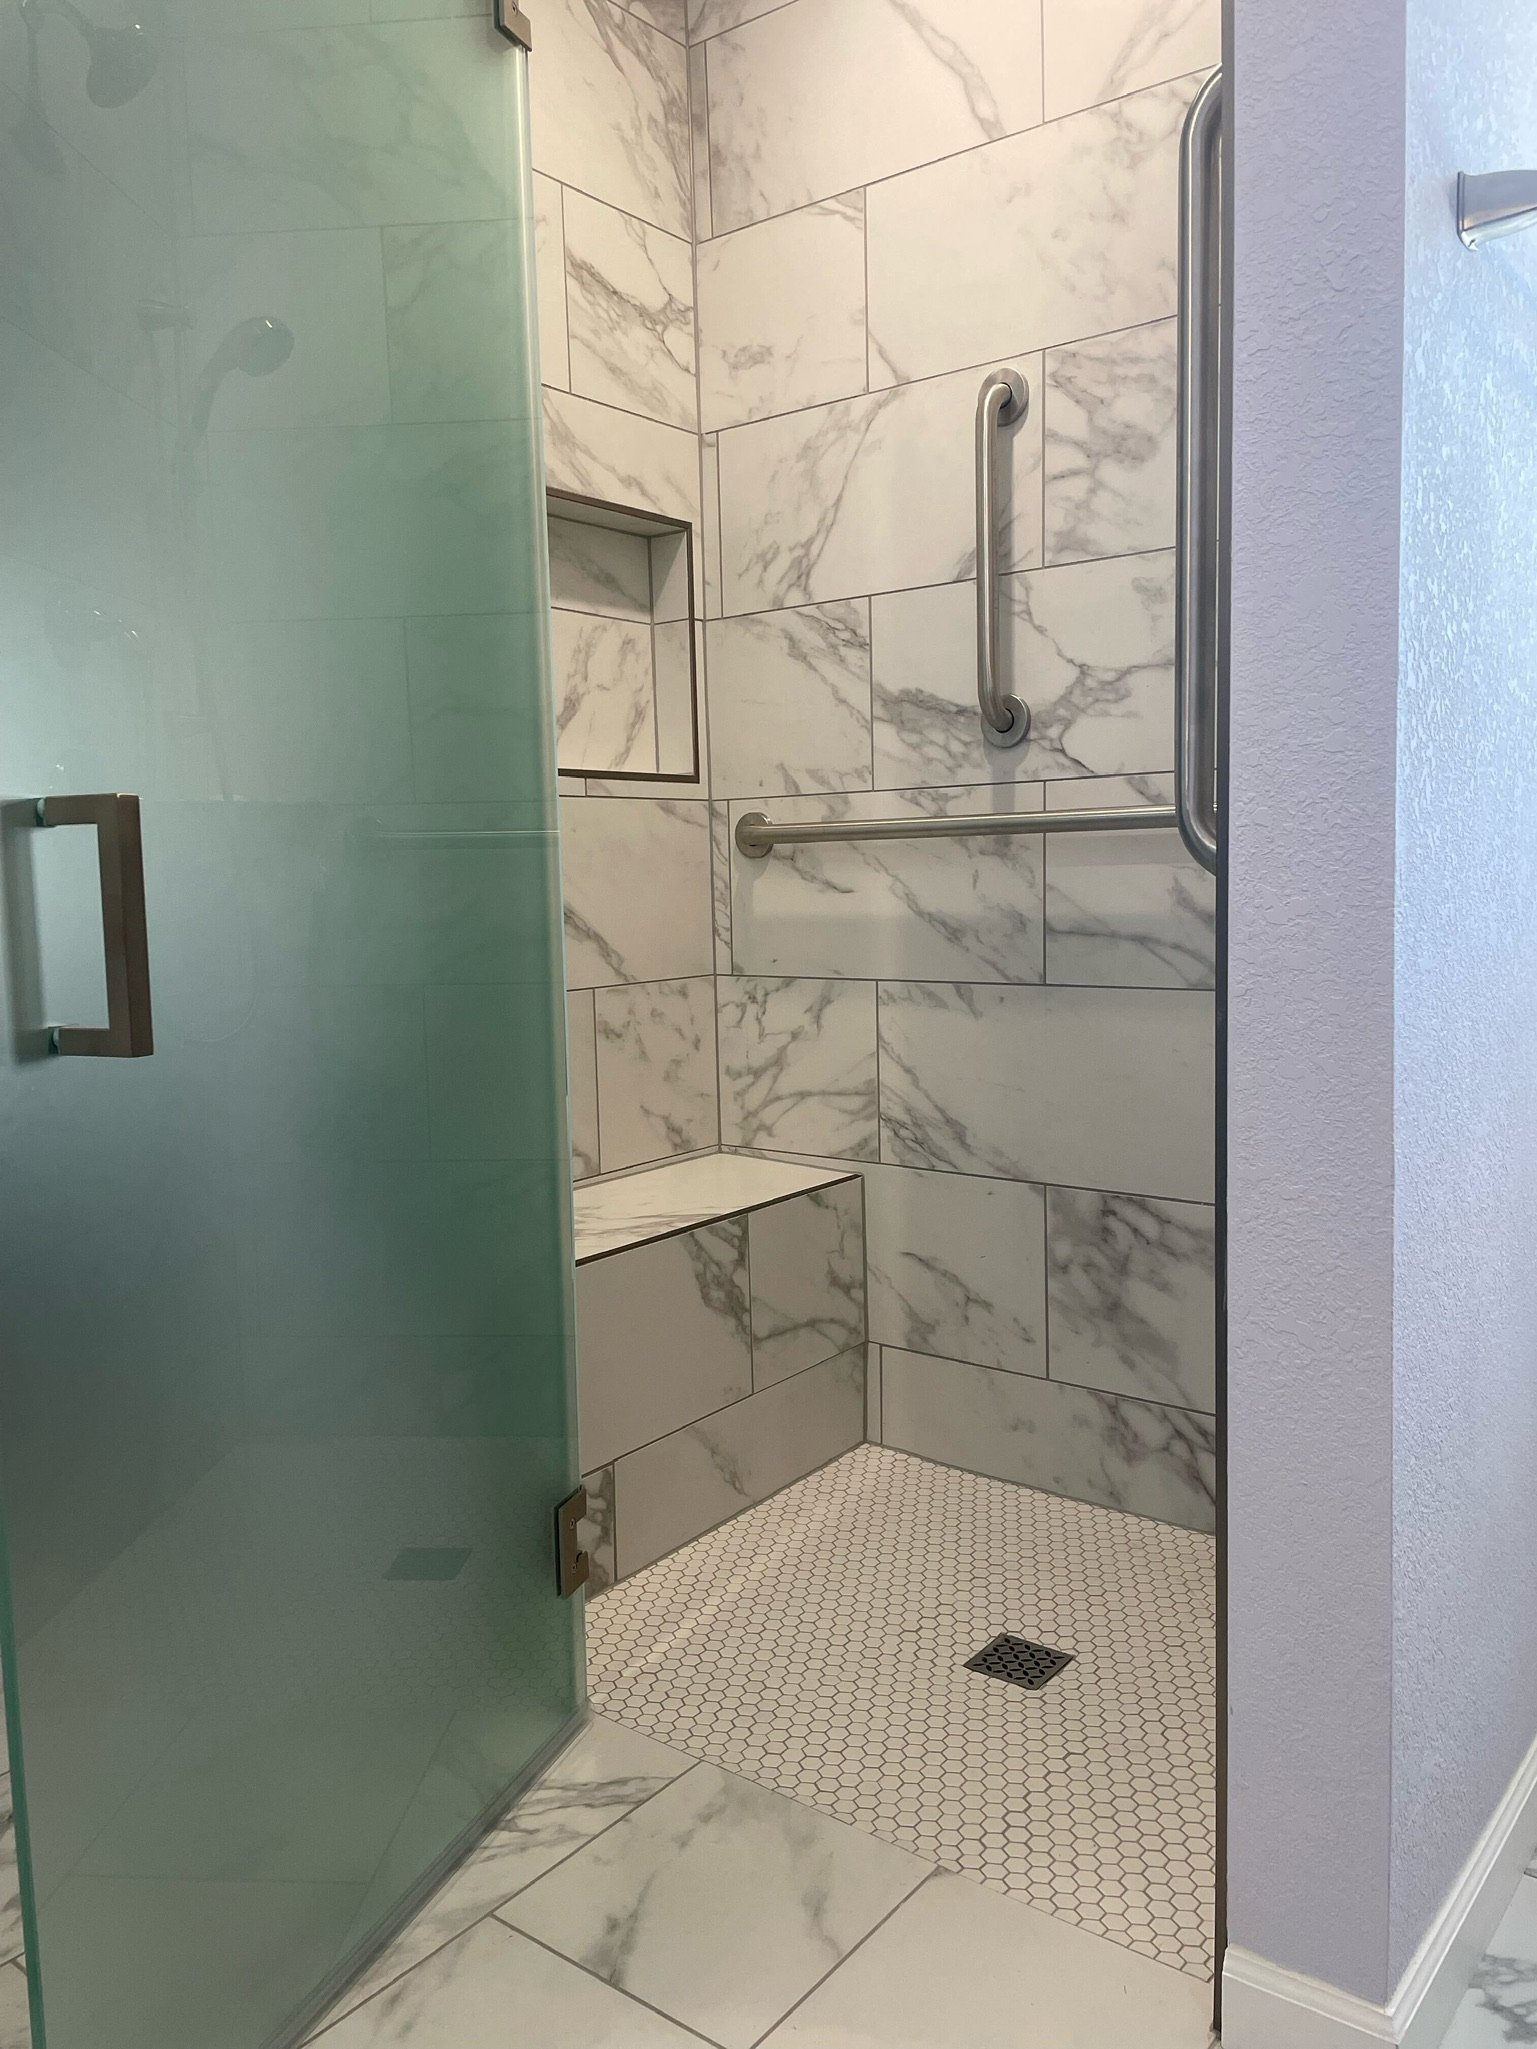 Walk-in shower with marble tile and glass door